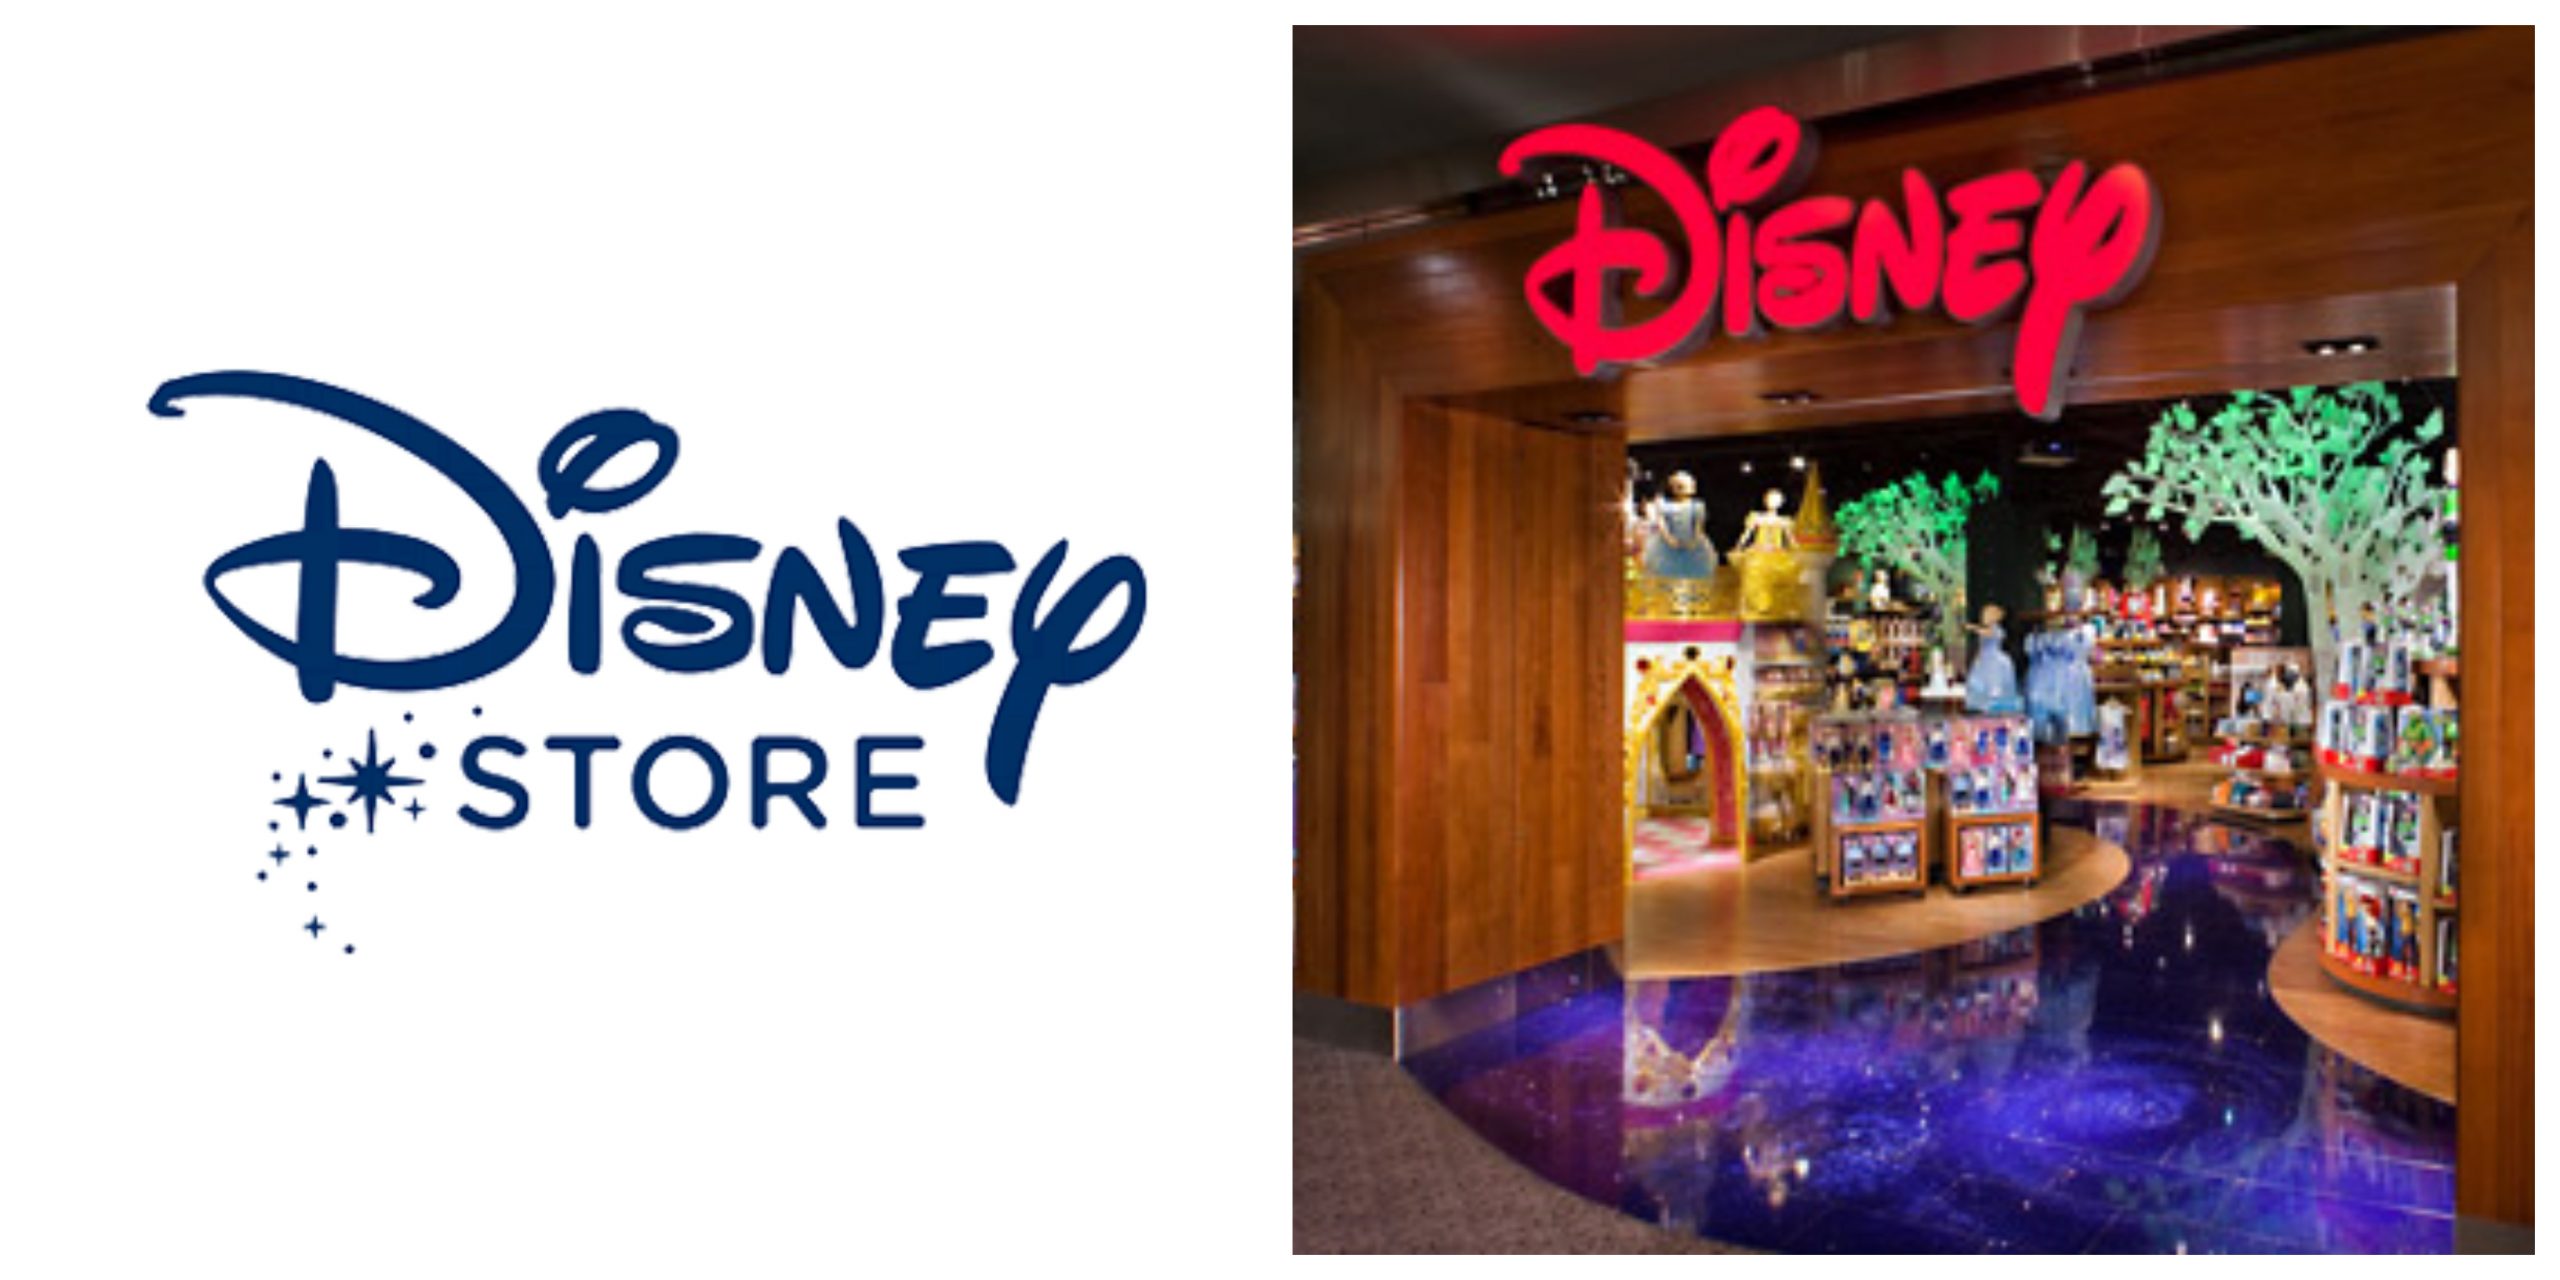 Disney Closing down at least 60 Disney Stores in the US this year